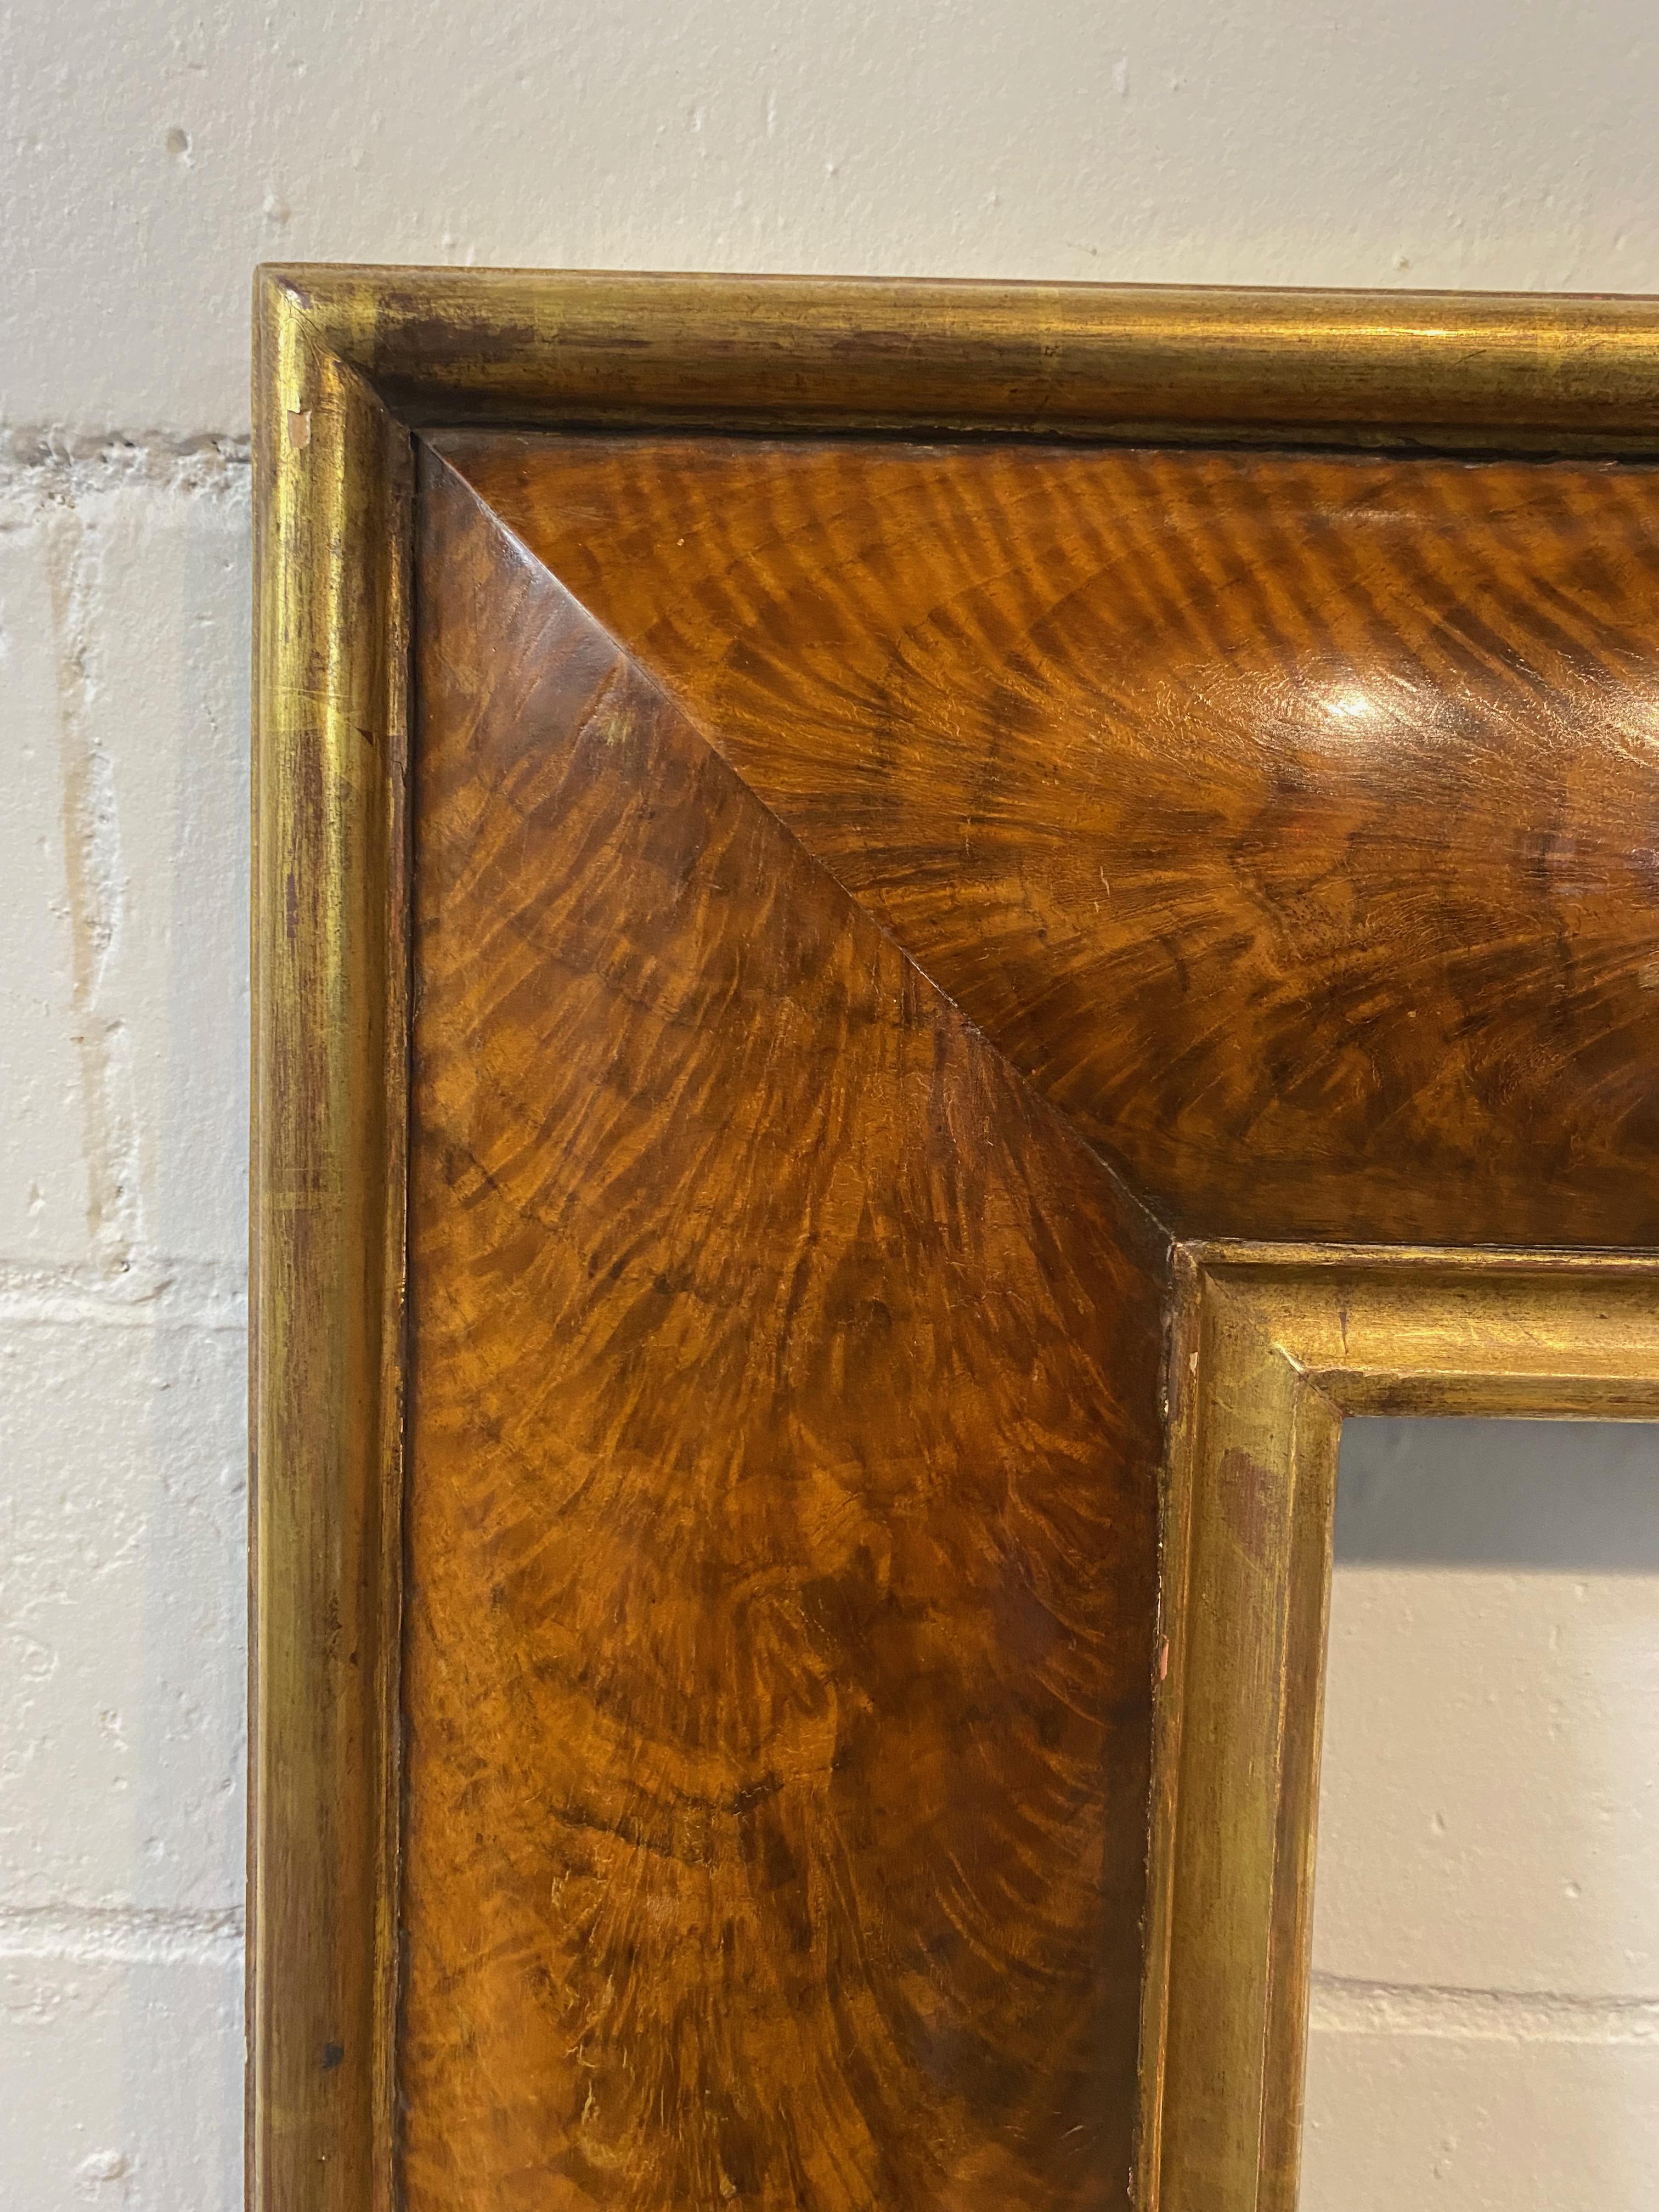 This is a stunning French burl walnut frame with gilt trim, an exquisite piece of art that showcases the best of contemporary French craftsmanship. The beautiful convex shape of the frame accentuates the gorgeous burl walnut wood grain, creating a